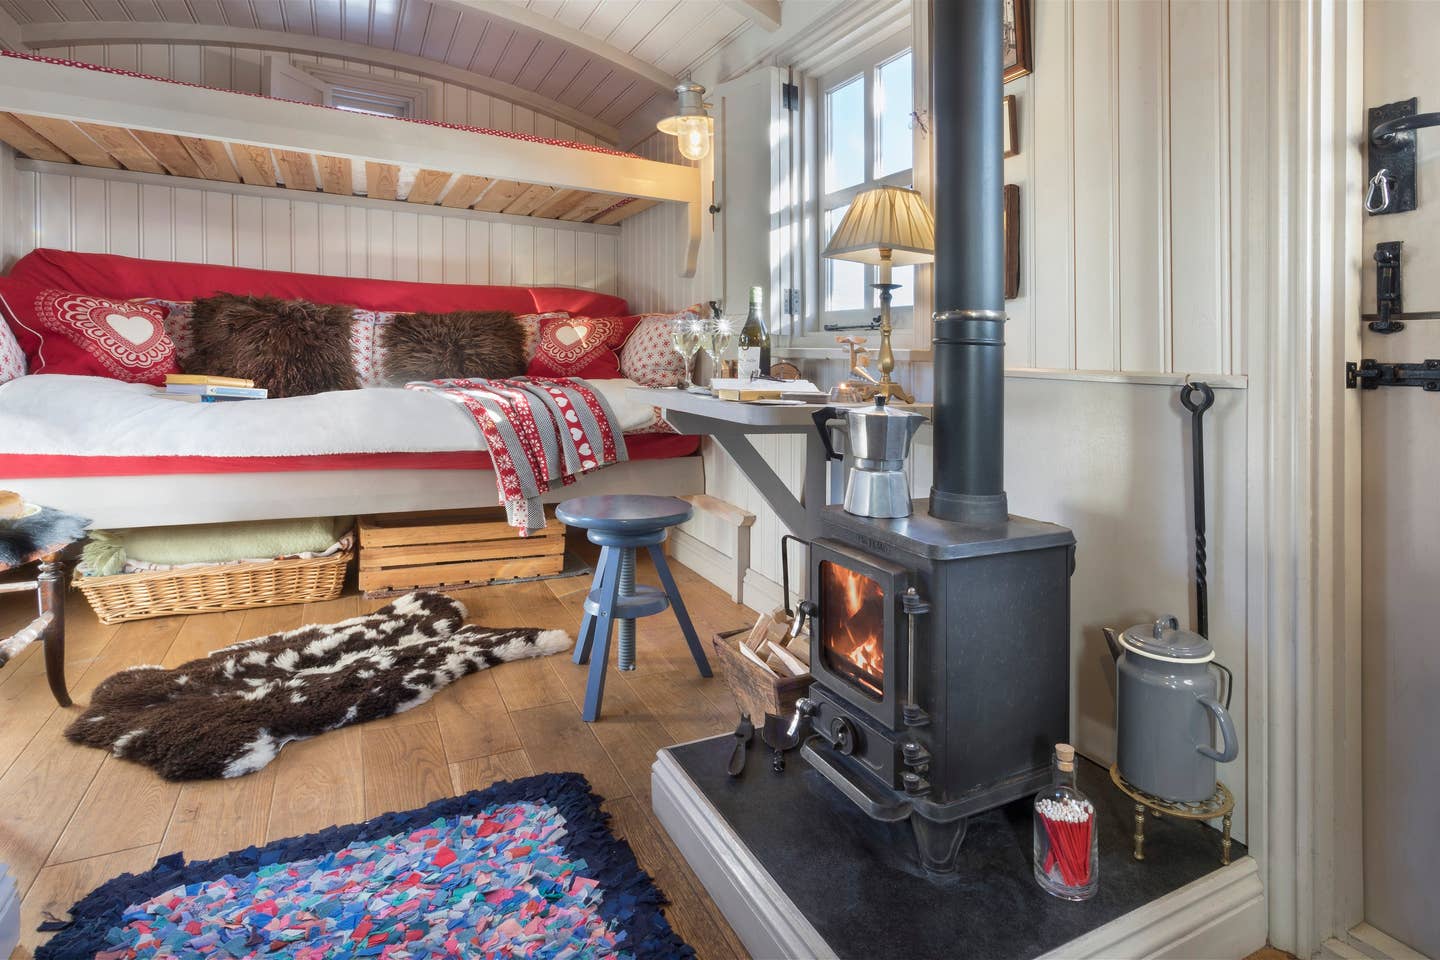 wood-stove-desk-and-sofa-bed-in-cute-shepherds-hut-airbnbs-lake-district